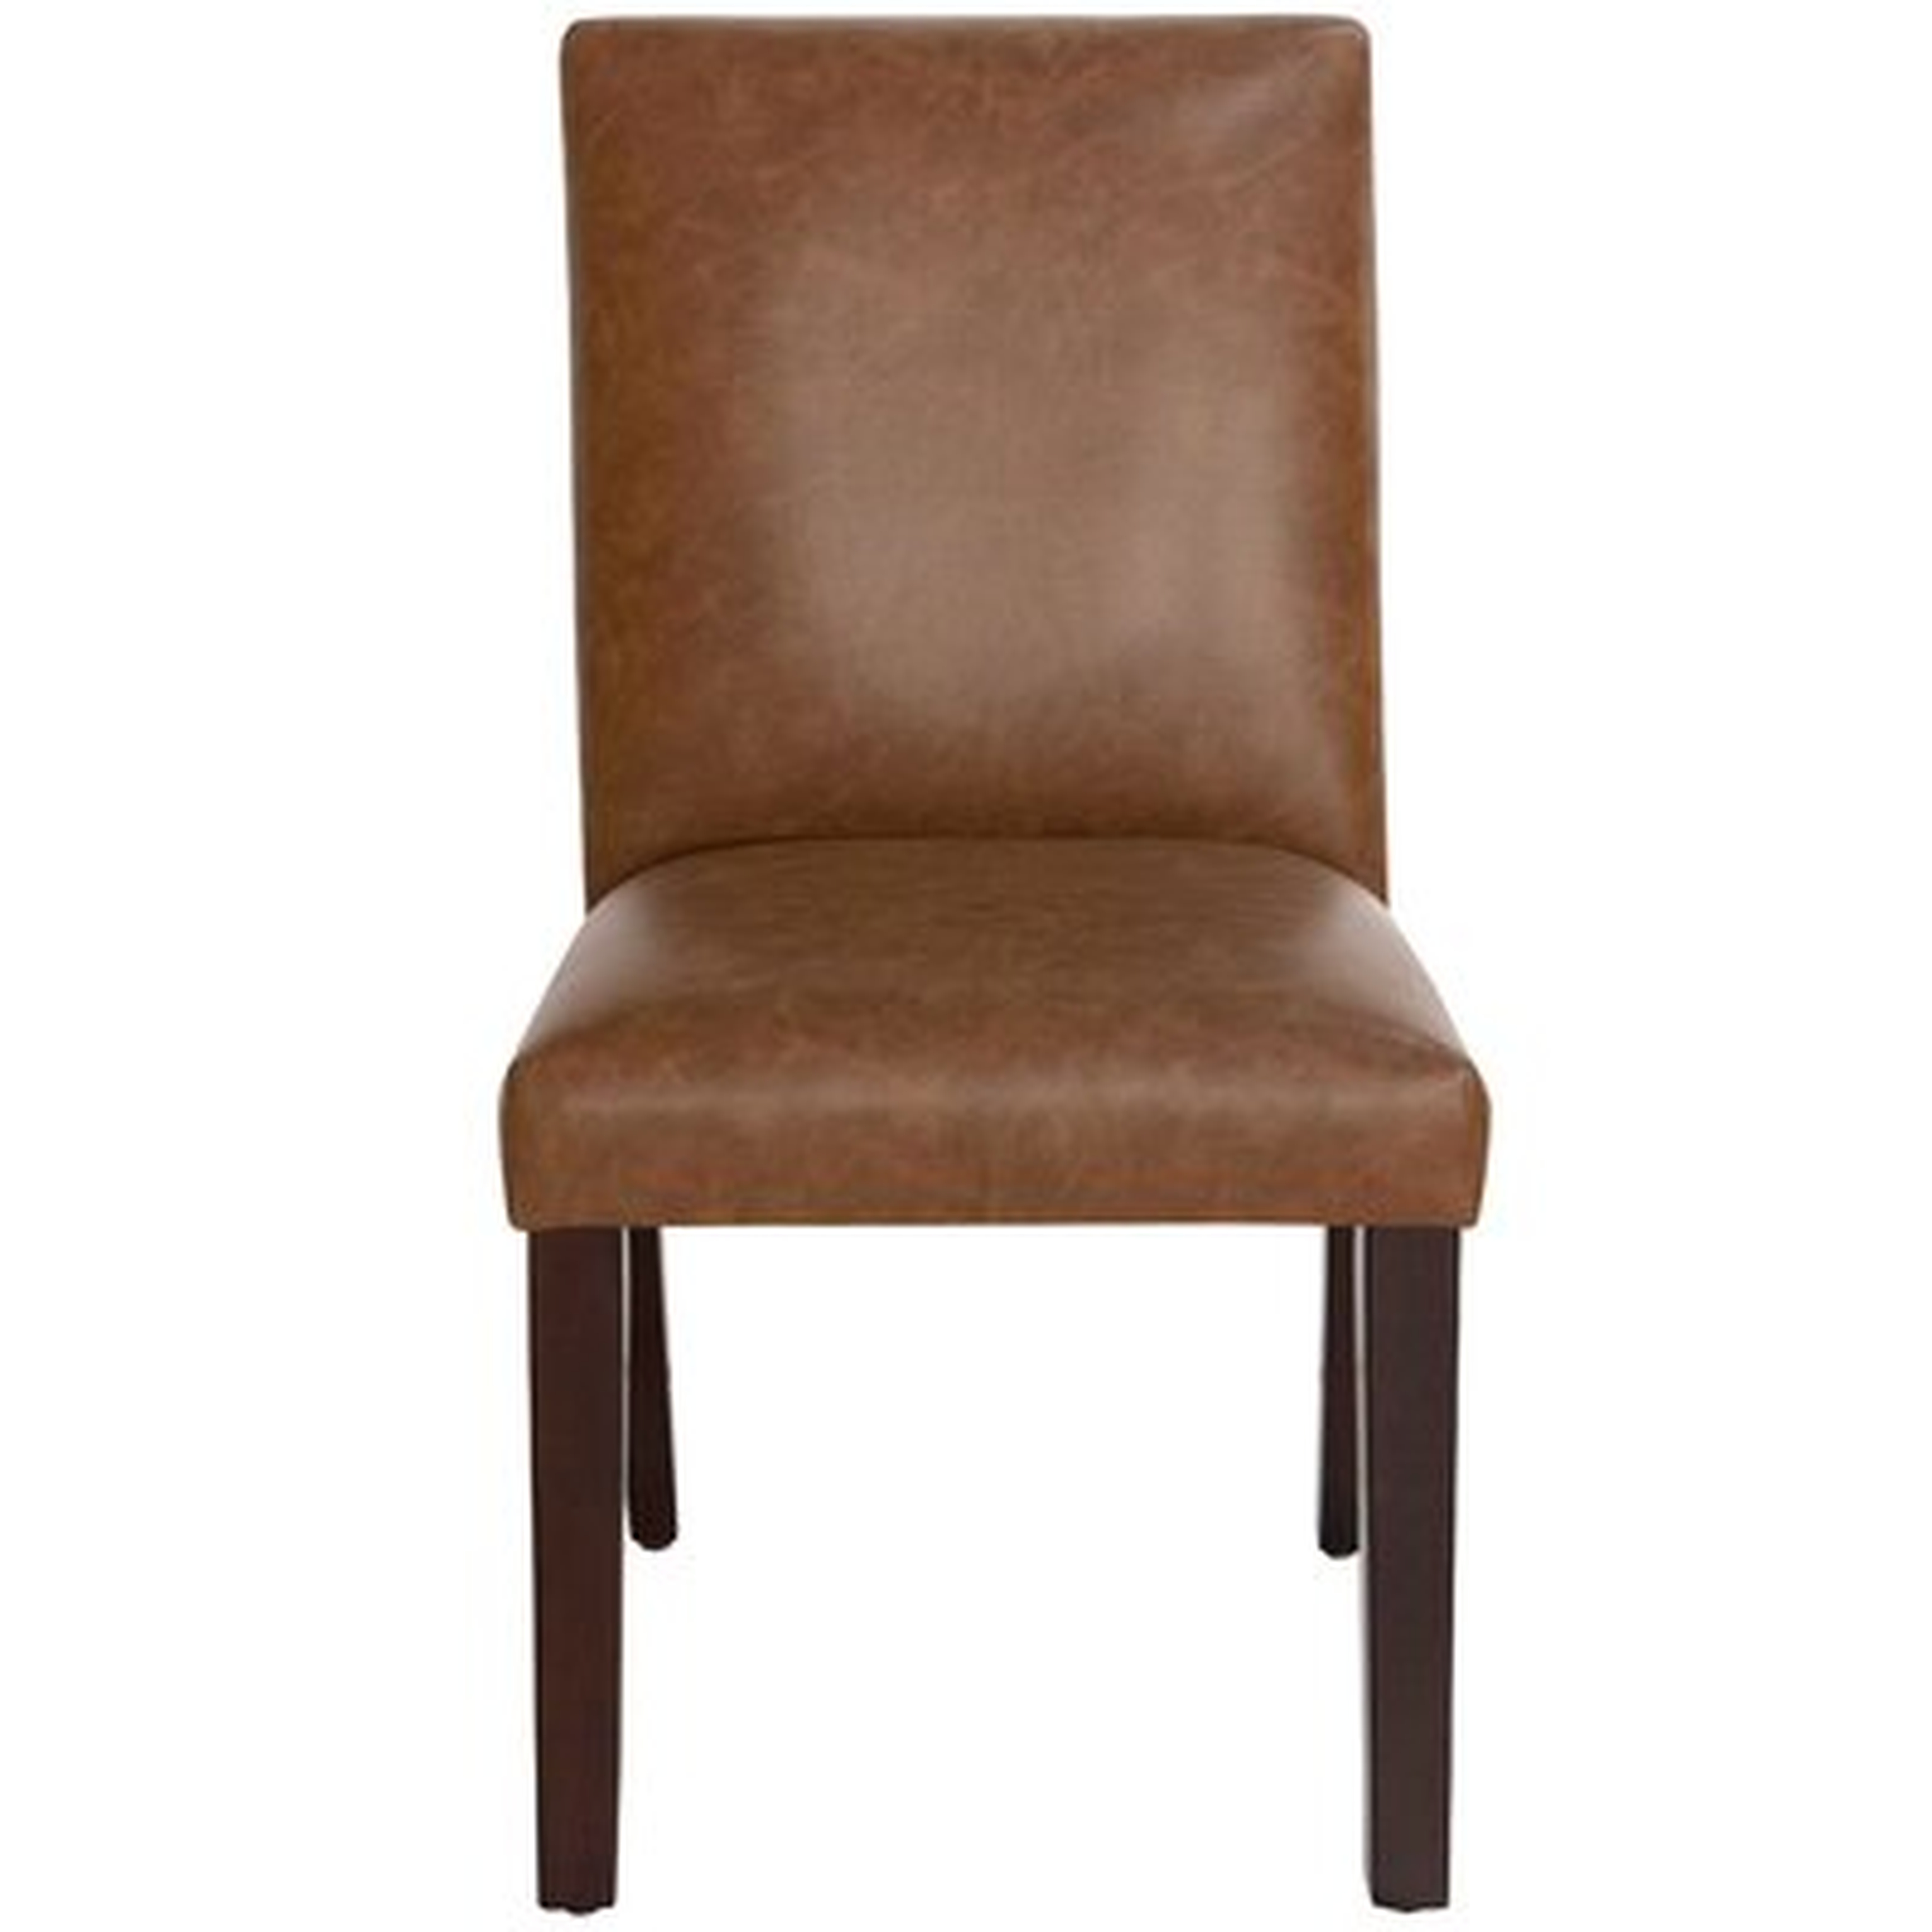 Lexie Leather Upholstered Wood Side Chair in Brown - Wayfair